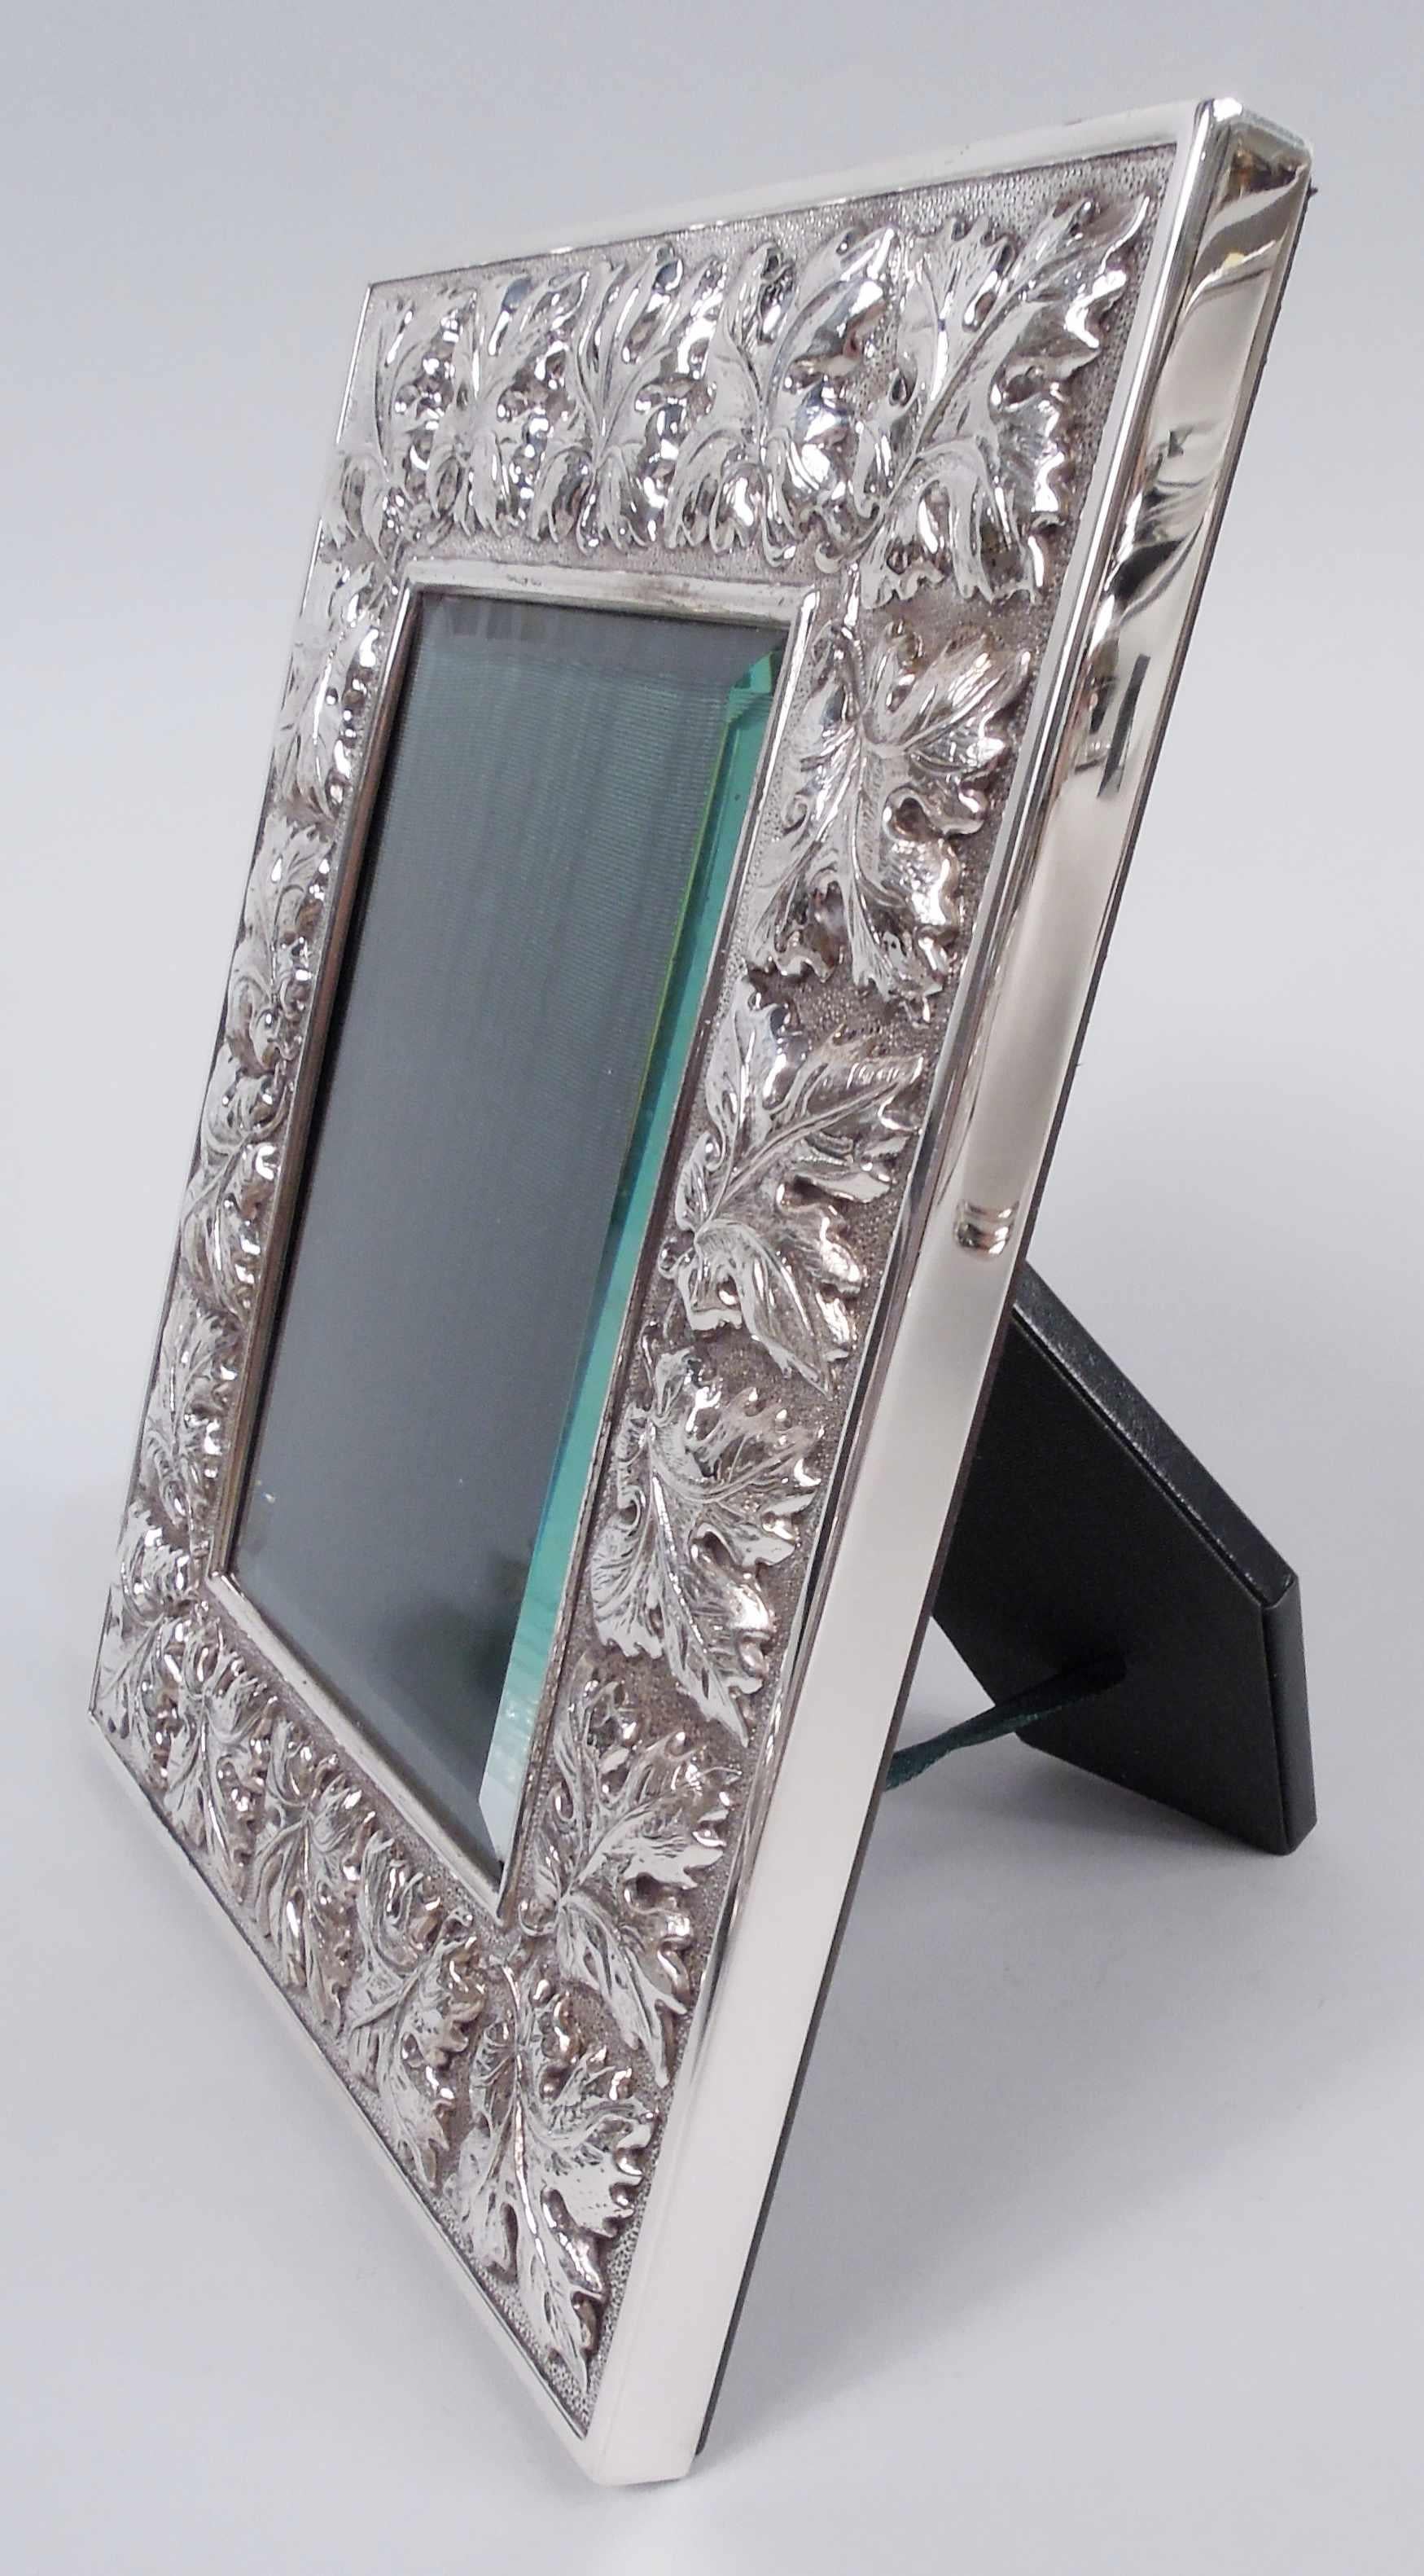 Modern Classical sterling silver picture frame. Made by Buccellati in Italy. Rectangular window in wide and cast surround with big and bold leaves in orderly wraparound arrangement on stippled ground. Sides plain. With beveled glass, silk lining,